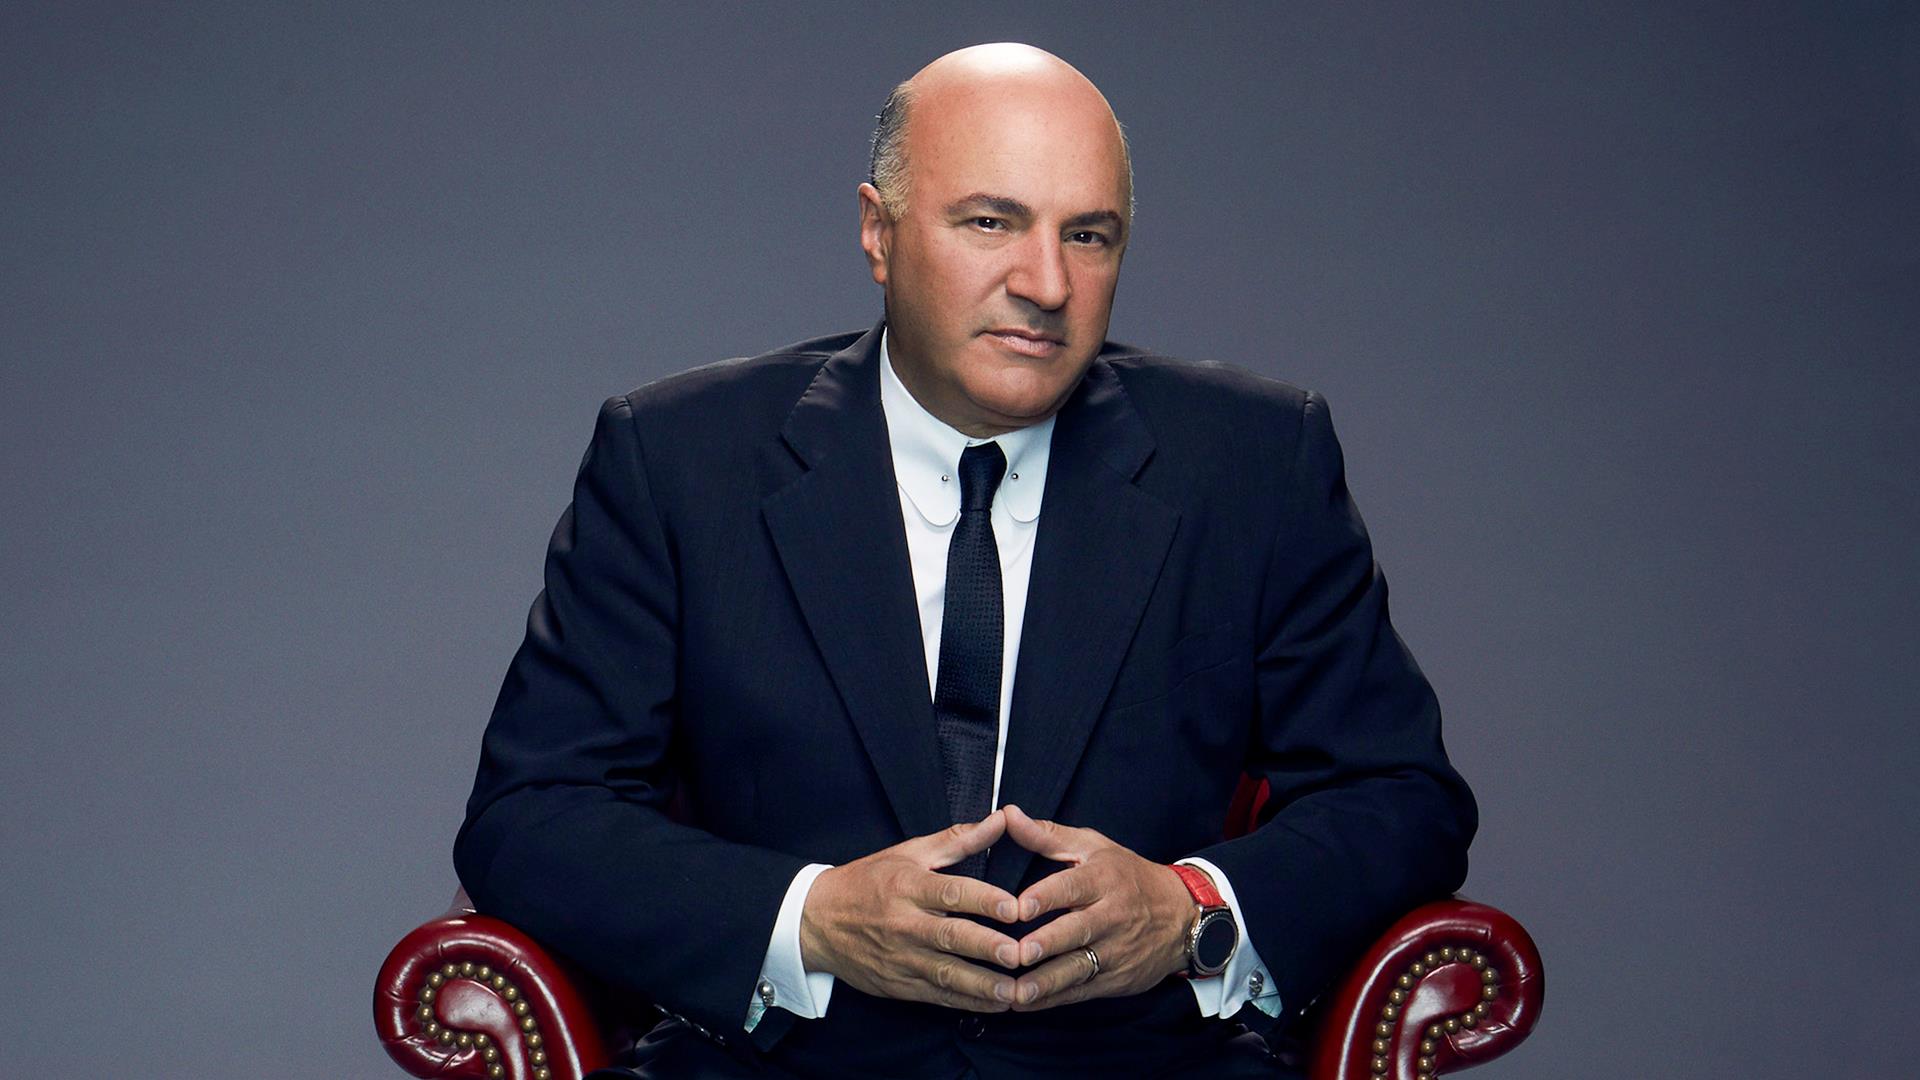 What is the Net worth of Kevin O’Leary?